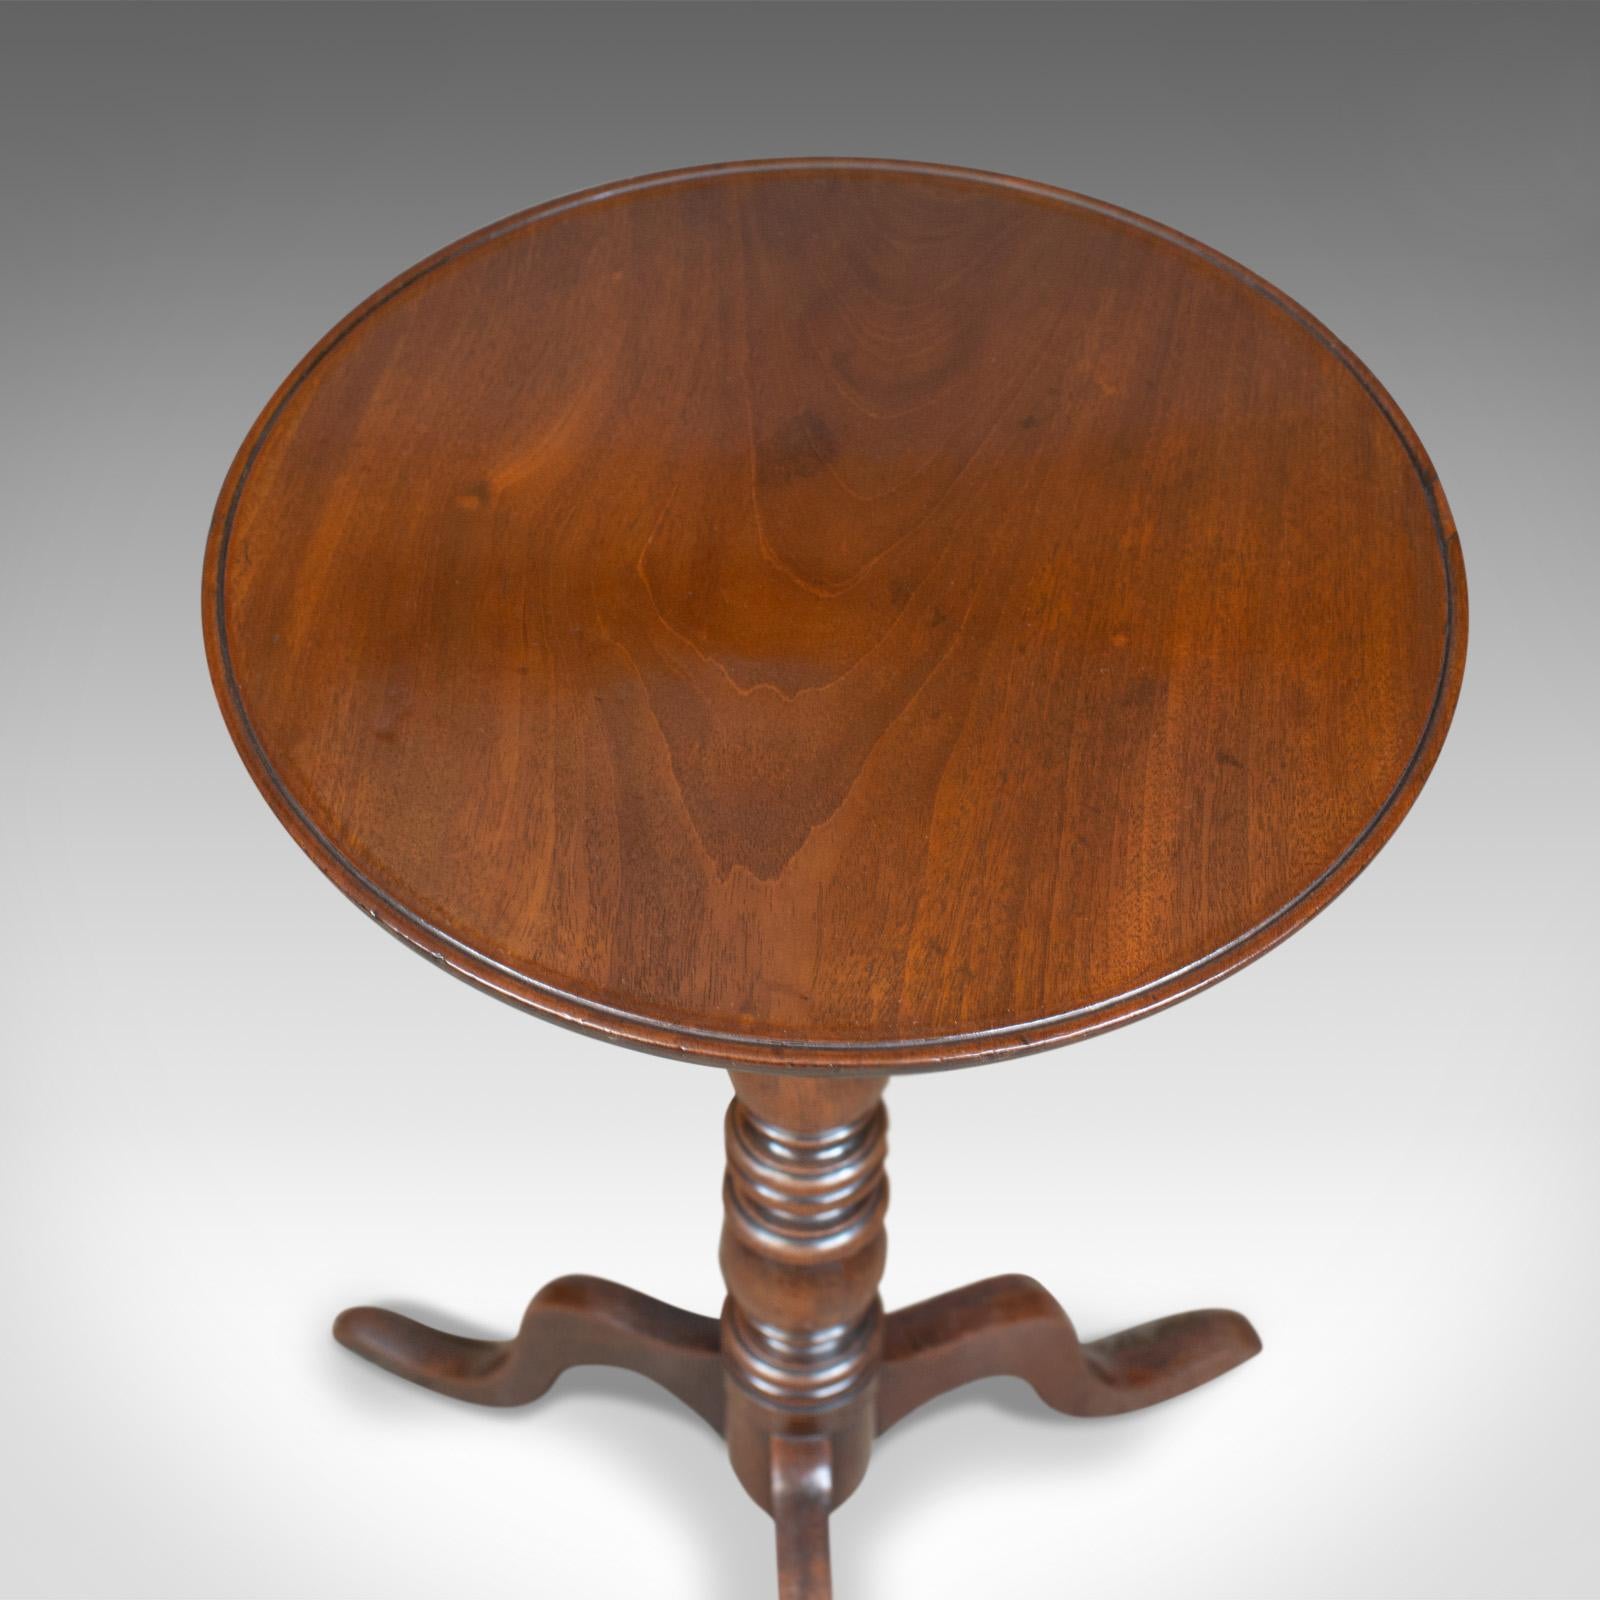 This is an antique wine table, a Victorian, circular, side table in mahogany dating to the mid-19th century, circa 1840.

Crafted in select stocks of quality mahogany
Good color and grain interest in a lustrous wax polished finish
Of quality